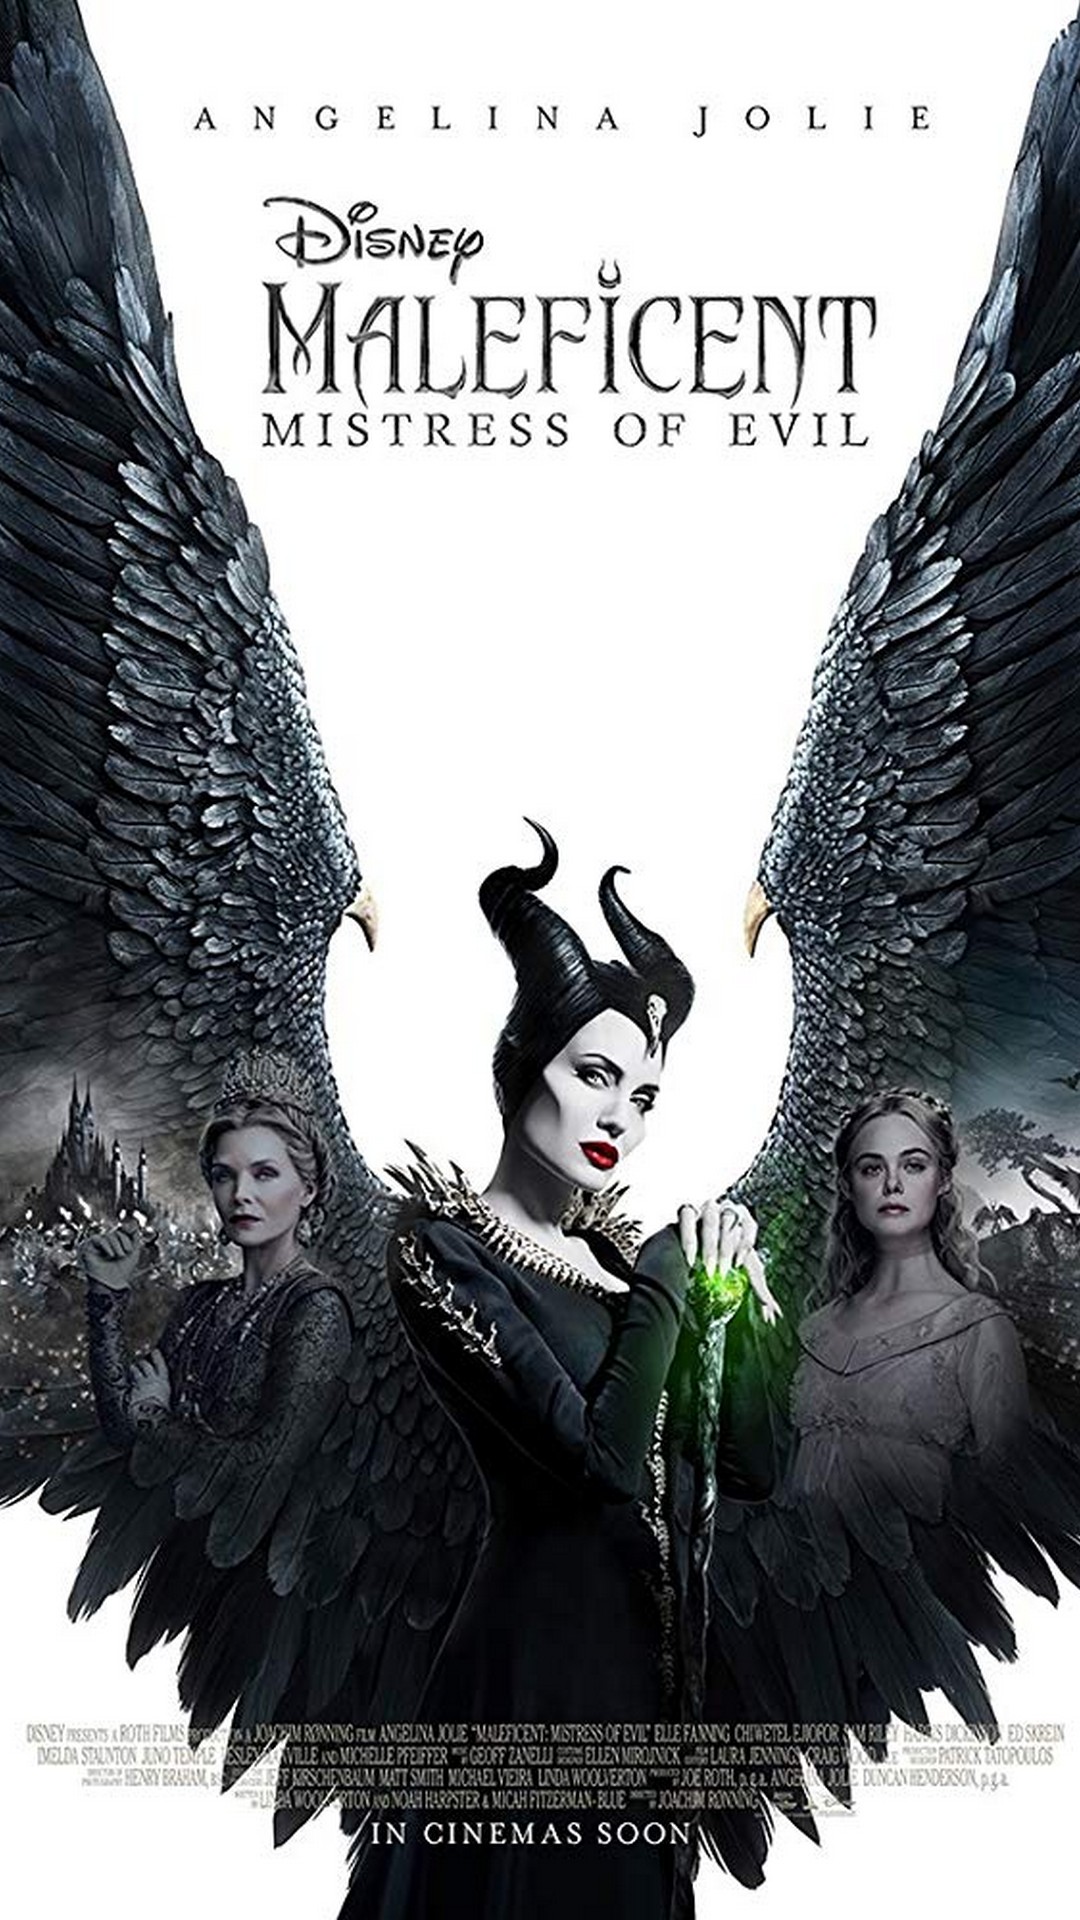 Maleficent Mistress of Evil Android Wallpaper with high-resolution 1080x1920 pixel. You can use this wallpaper for your Android backgrounds, Tablet, Samsung Screensavers, Mobile Phone Lock Screen and another Smartphones device